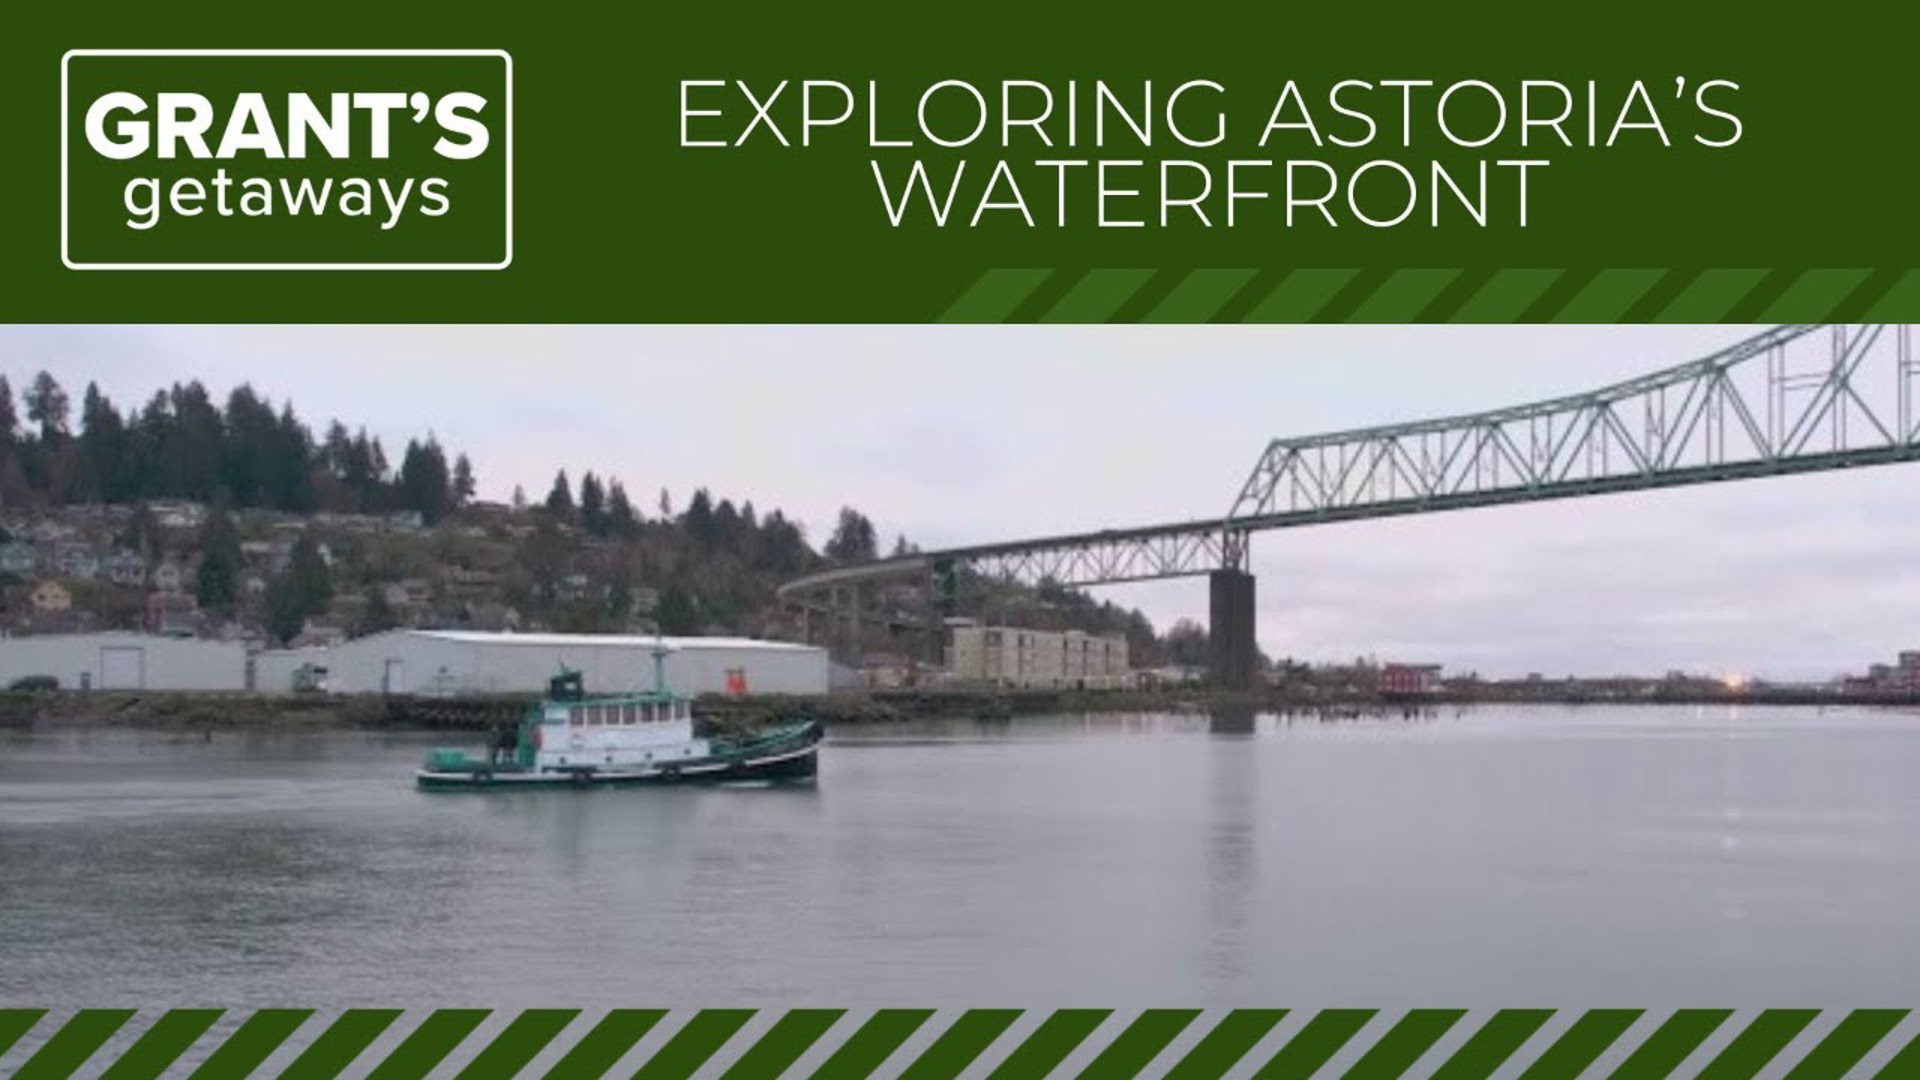 From a historical landmark and museums, to restaurants and breweries, Astoria is full of adventure and delicious dinning.